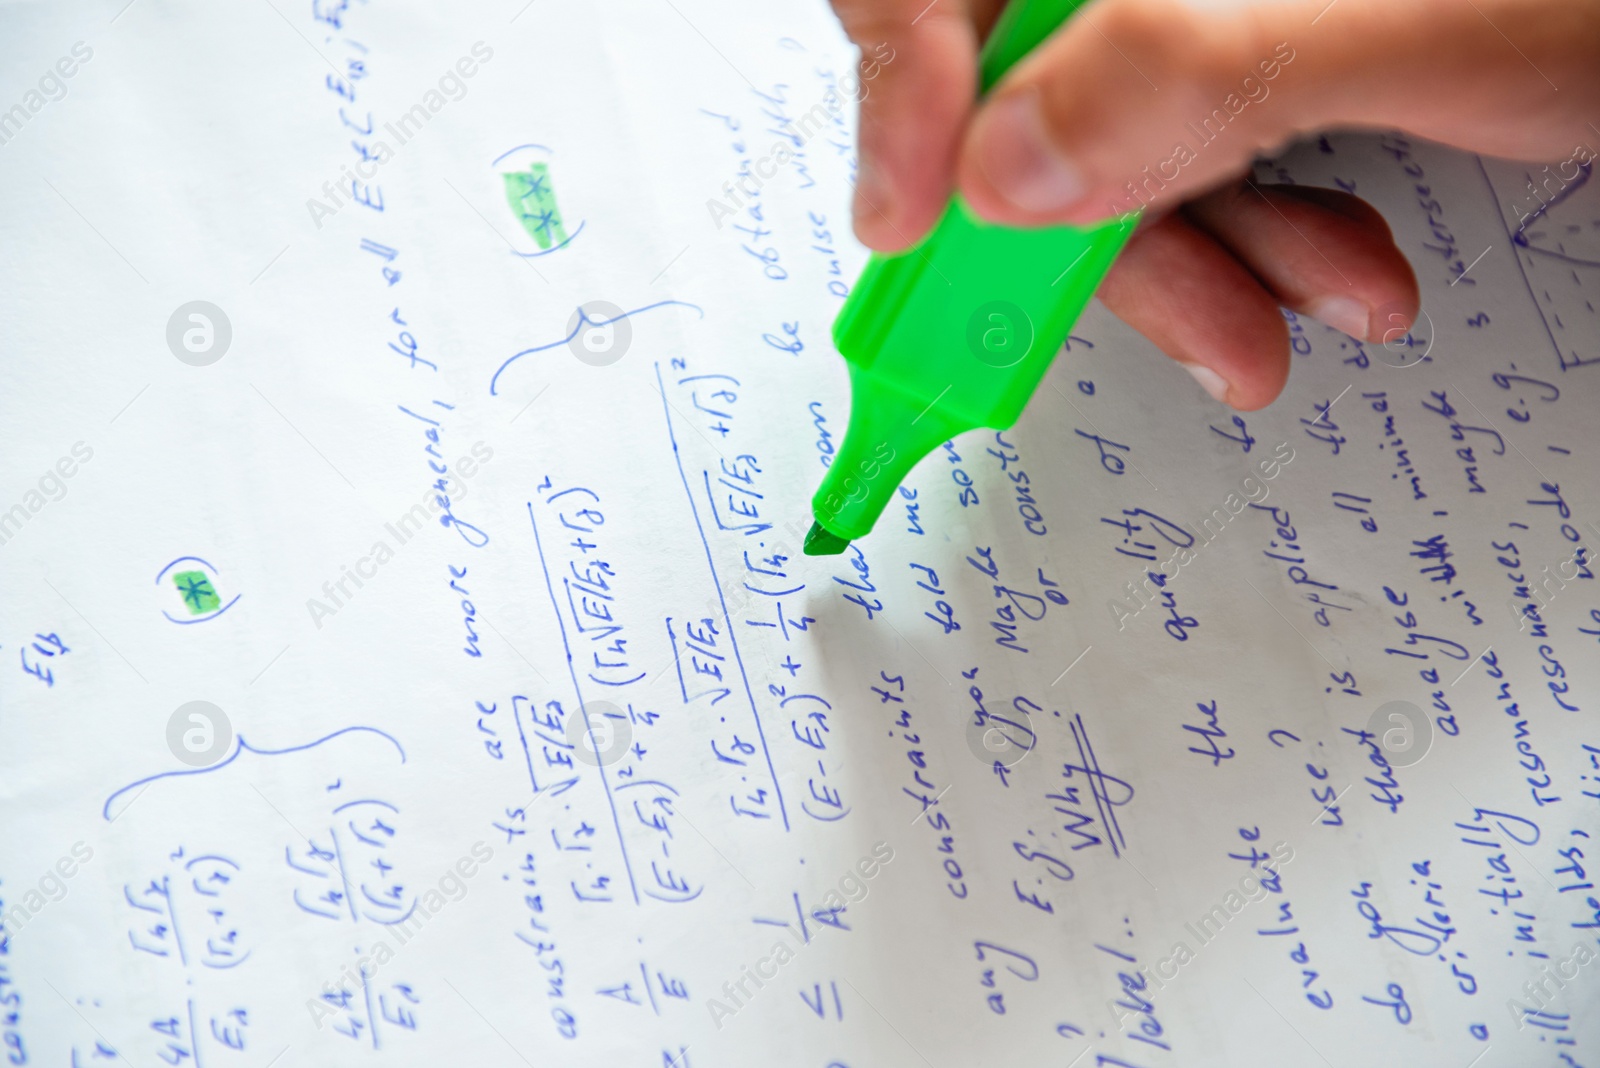 Photo of Student highlighting with green marker mathematical calculations, closeup